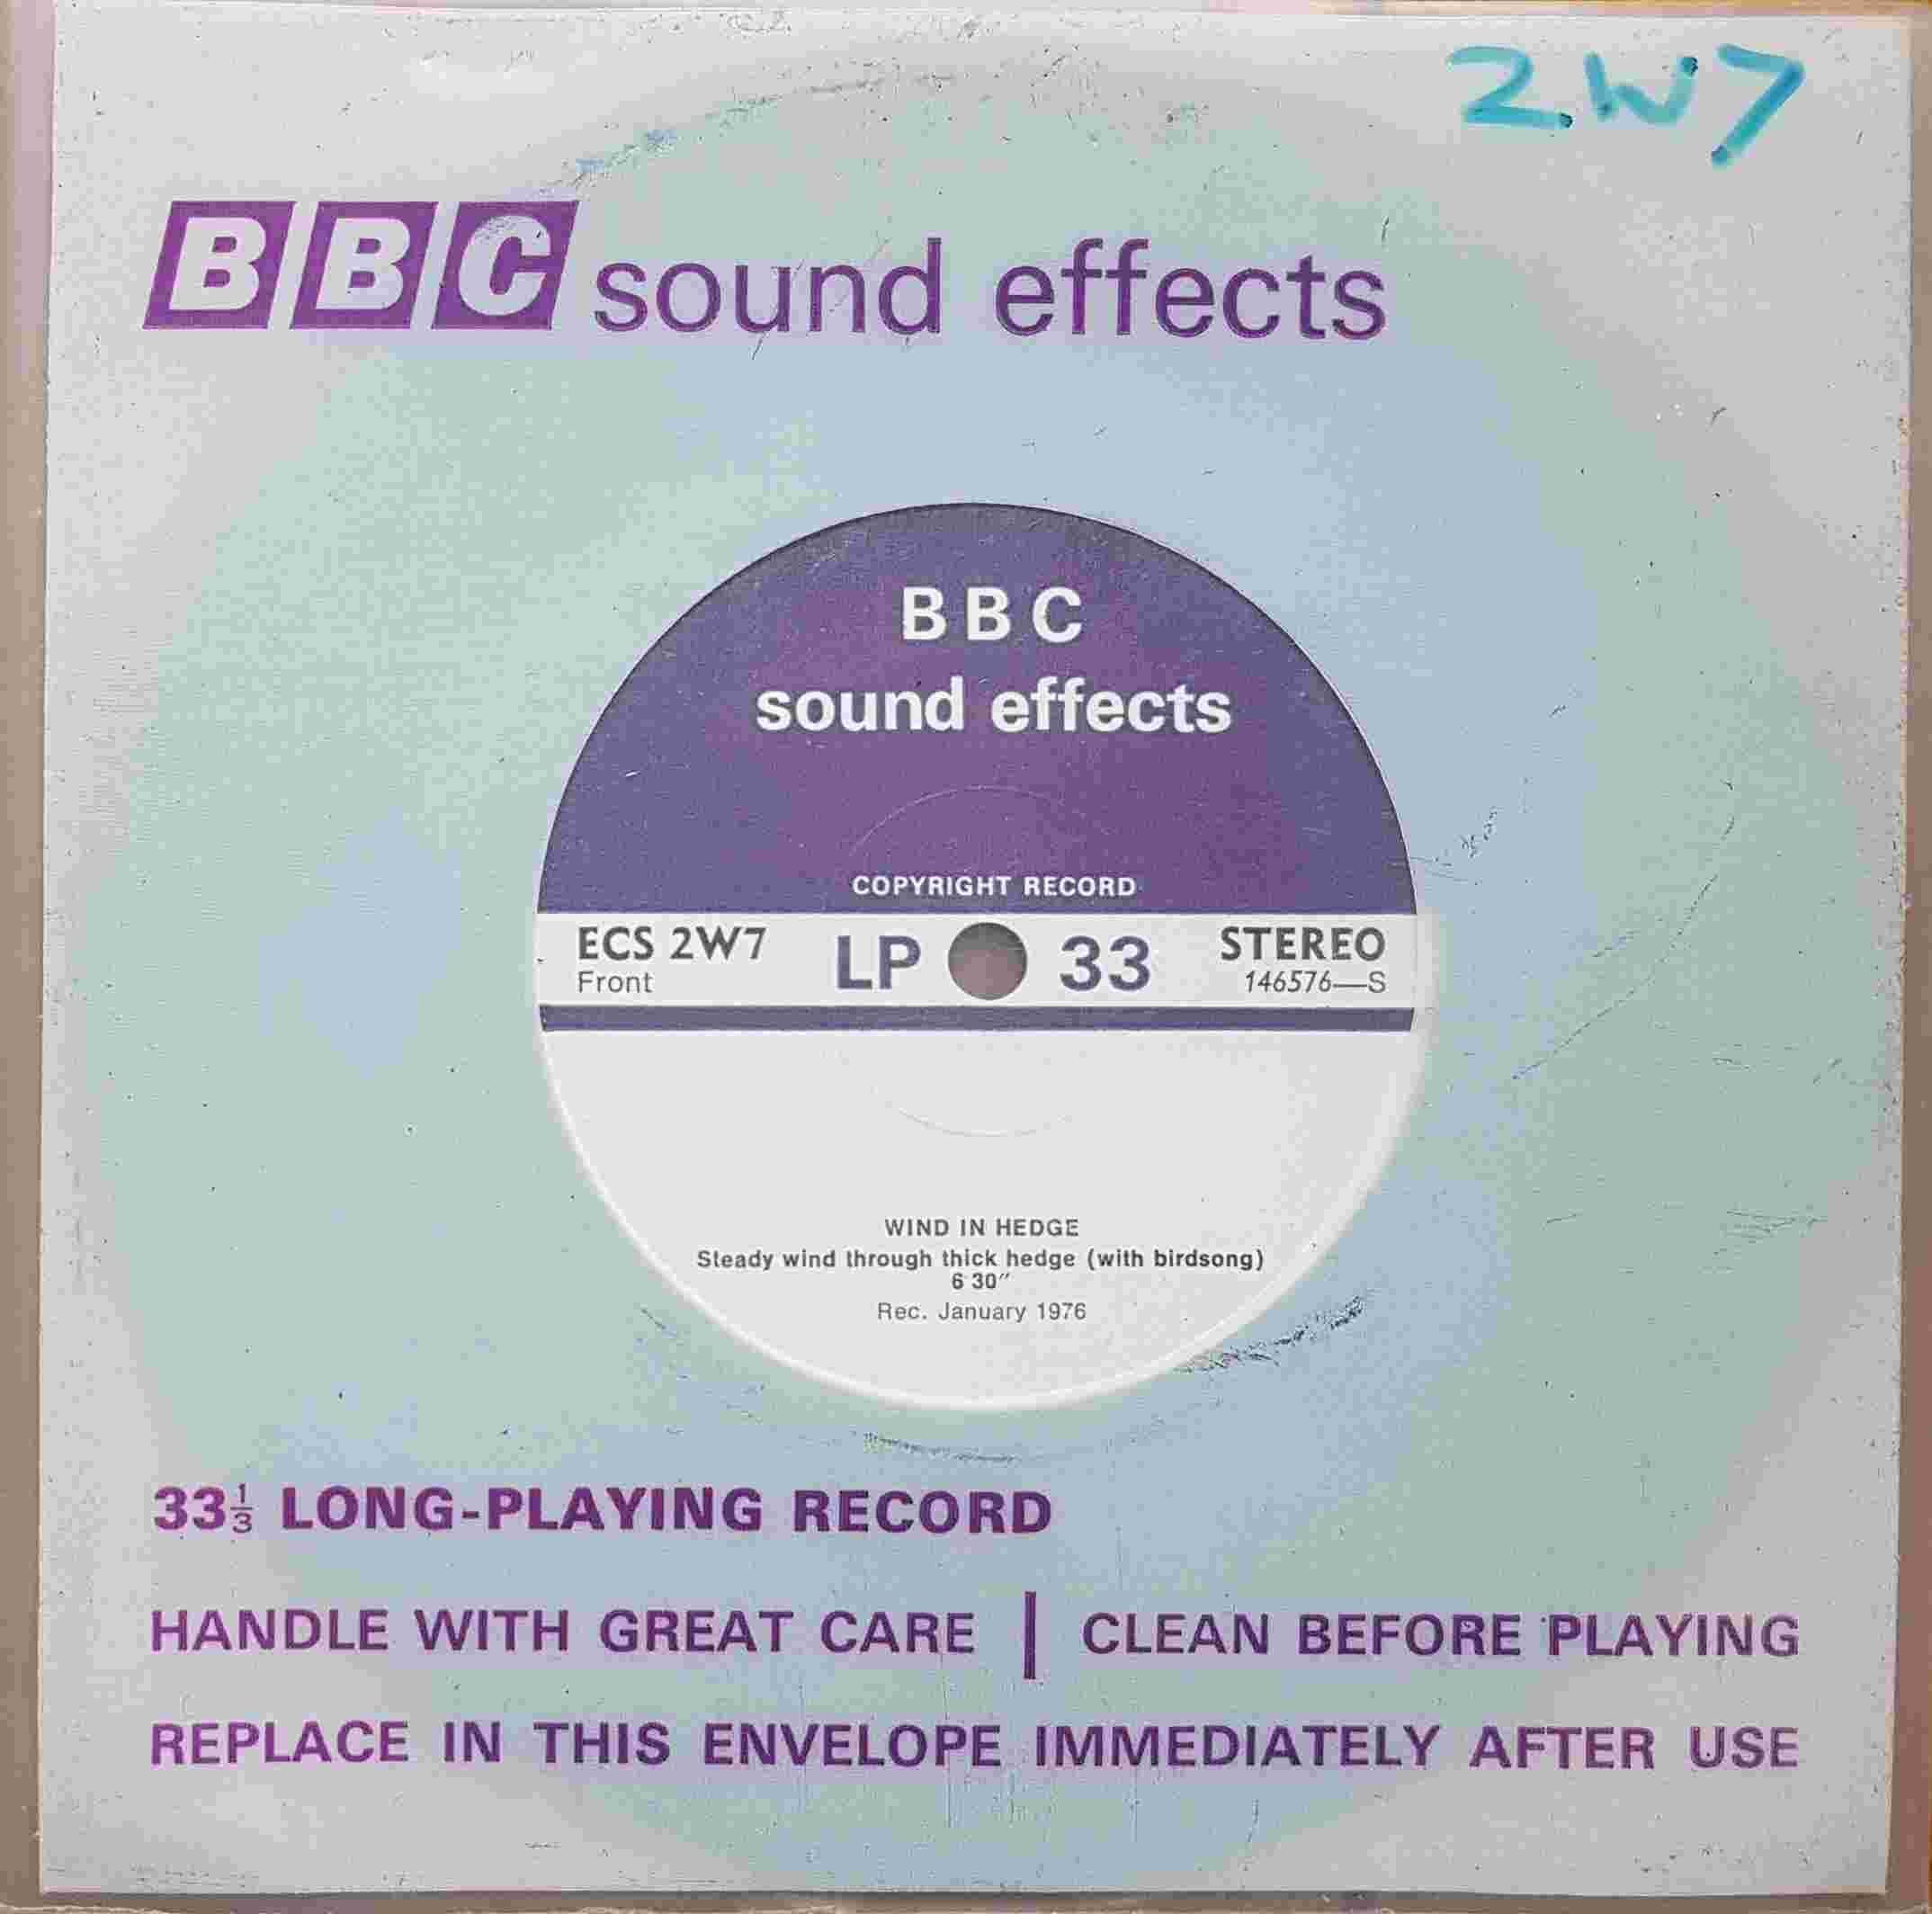 Picture of ECS 2W7 Wind in hedge / Wind in bushes by artist Not registered from the BBC records and Tapes library